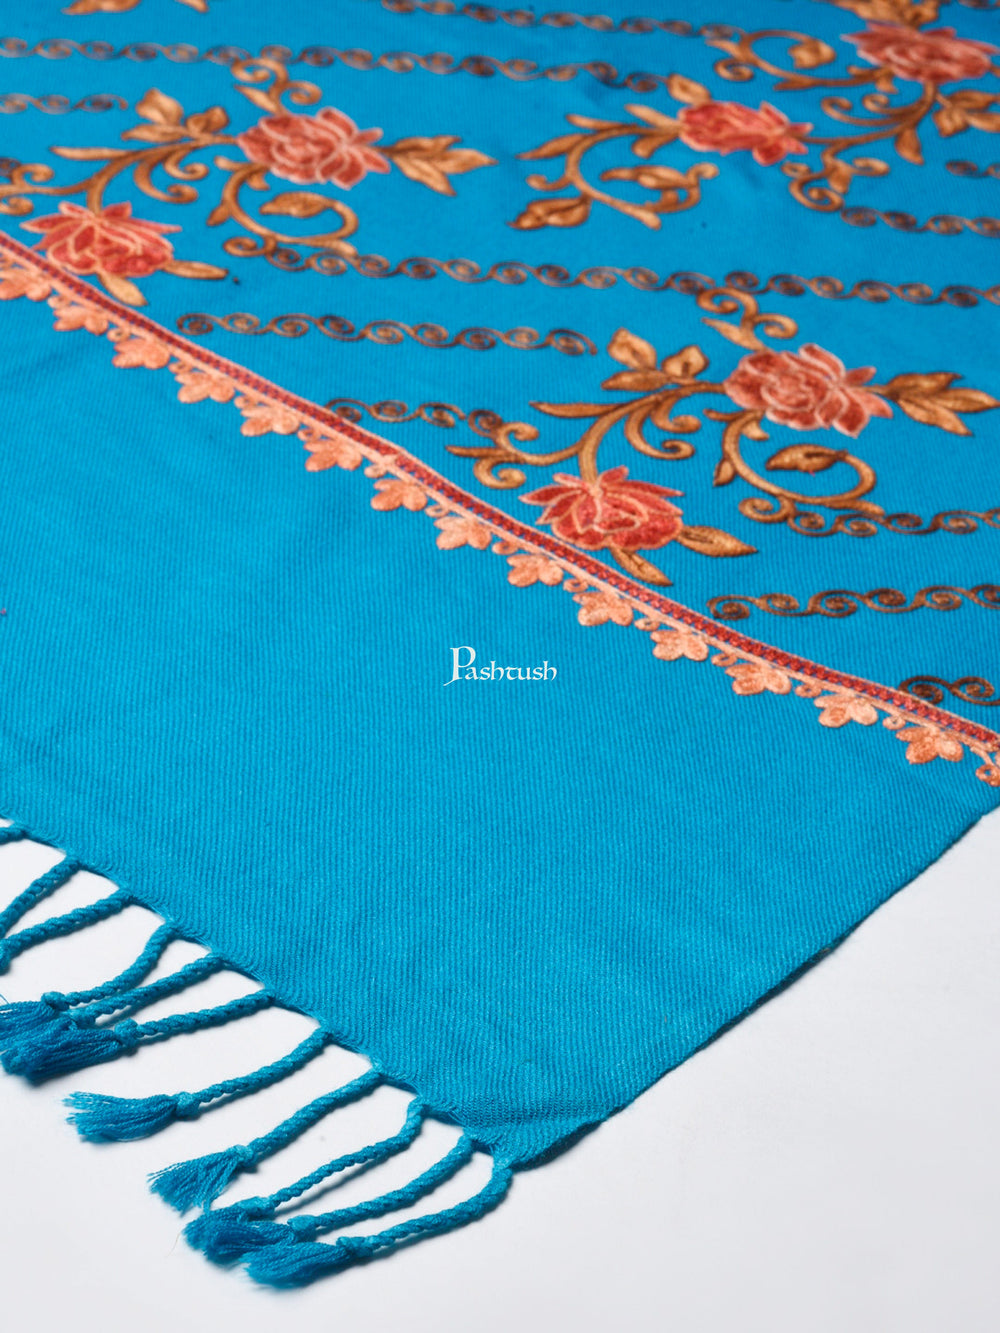 Pashtush India Womens Stoles and Scarves Scarf Pashtush Women Blue Coral Embroidered Designer Stole